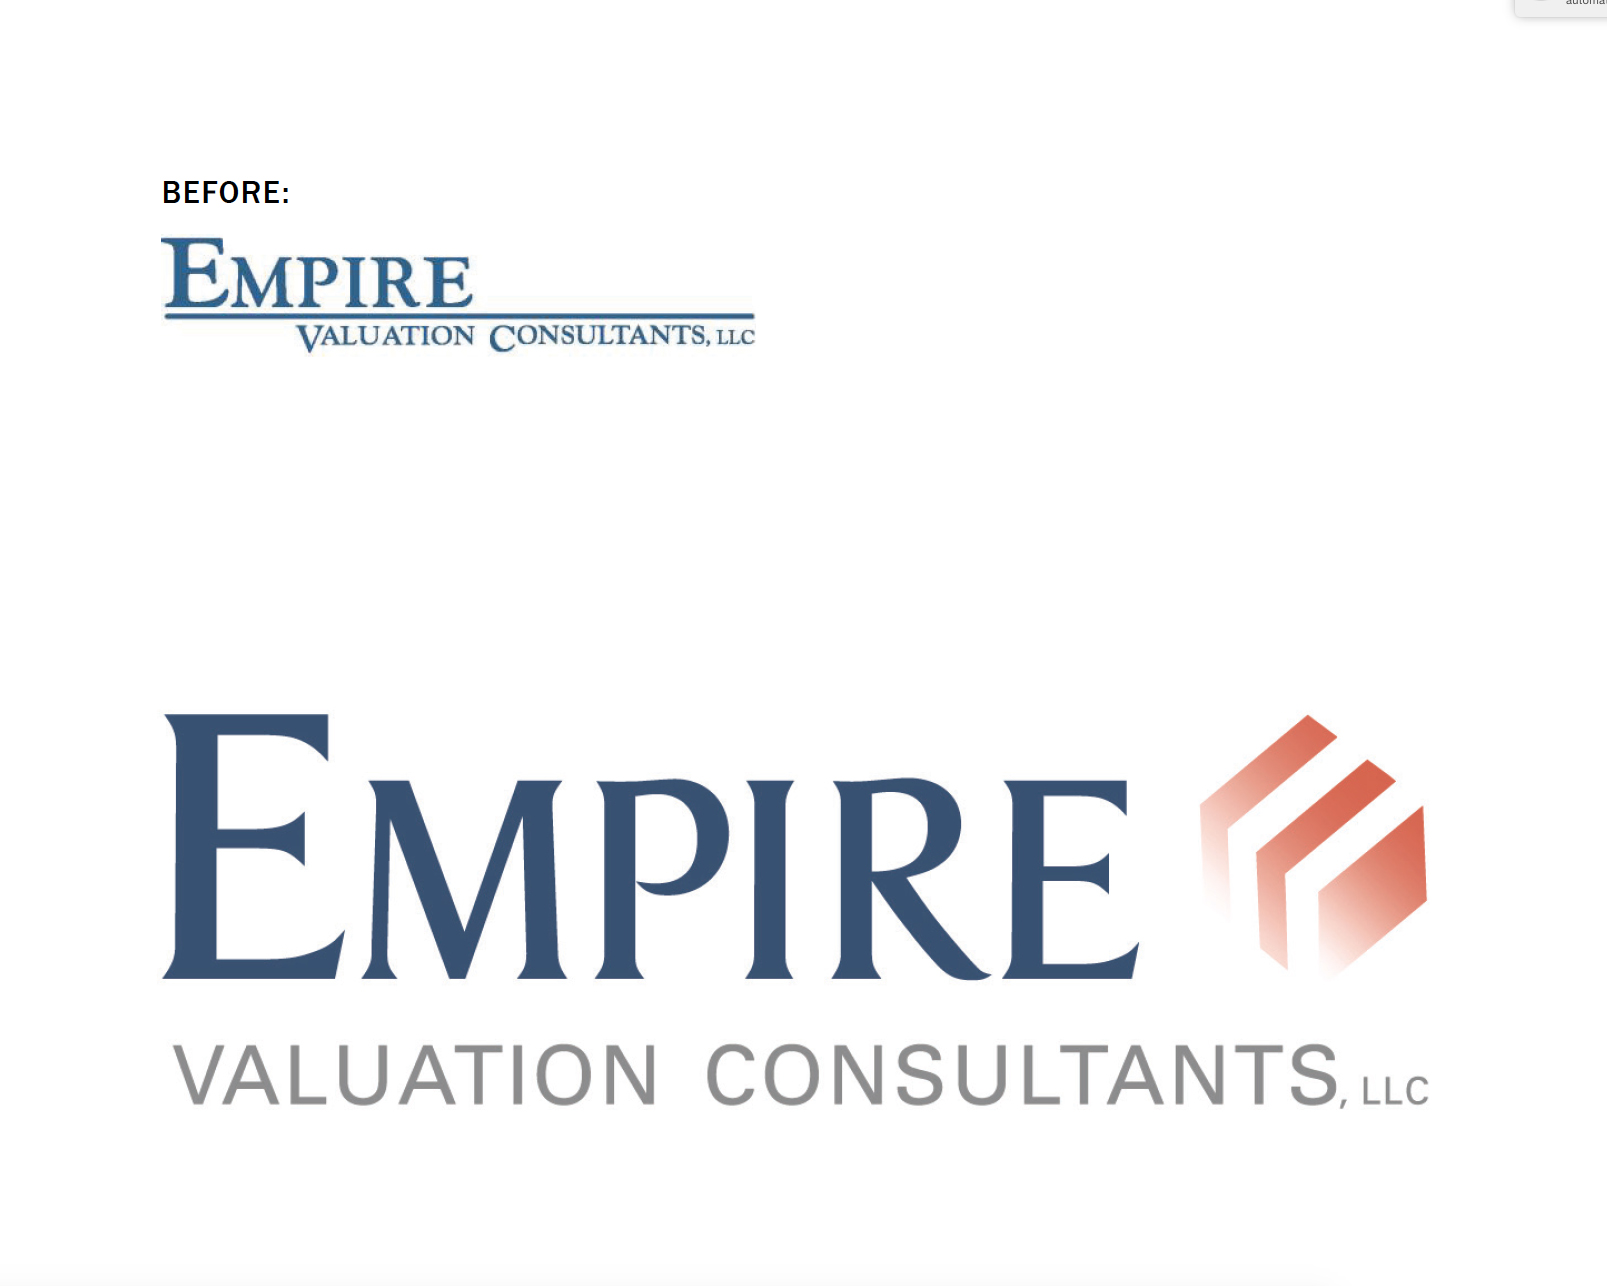 Empire Logo Before After.jpg